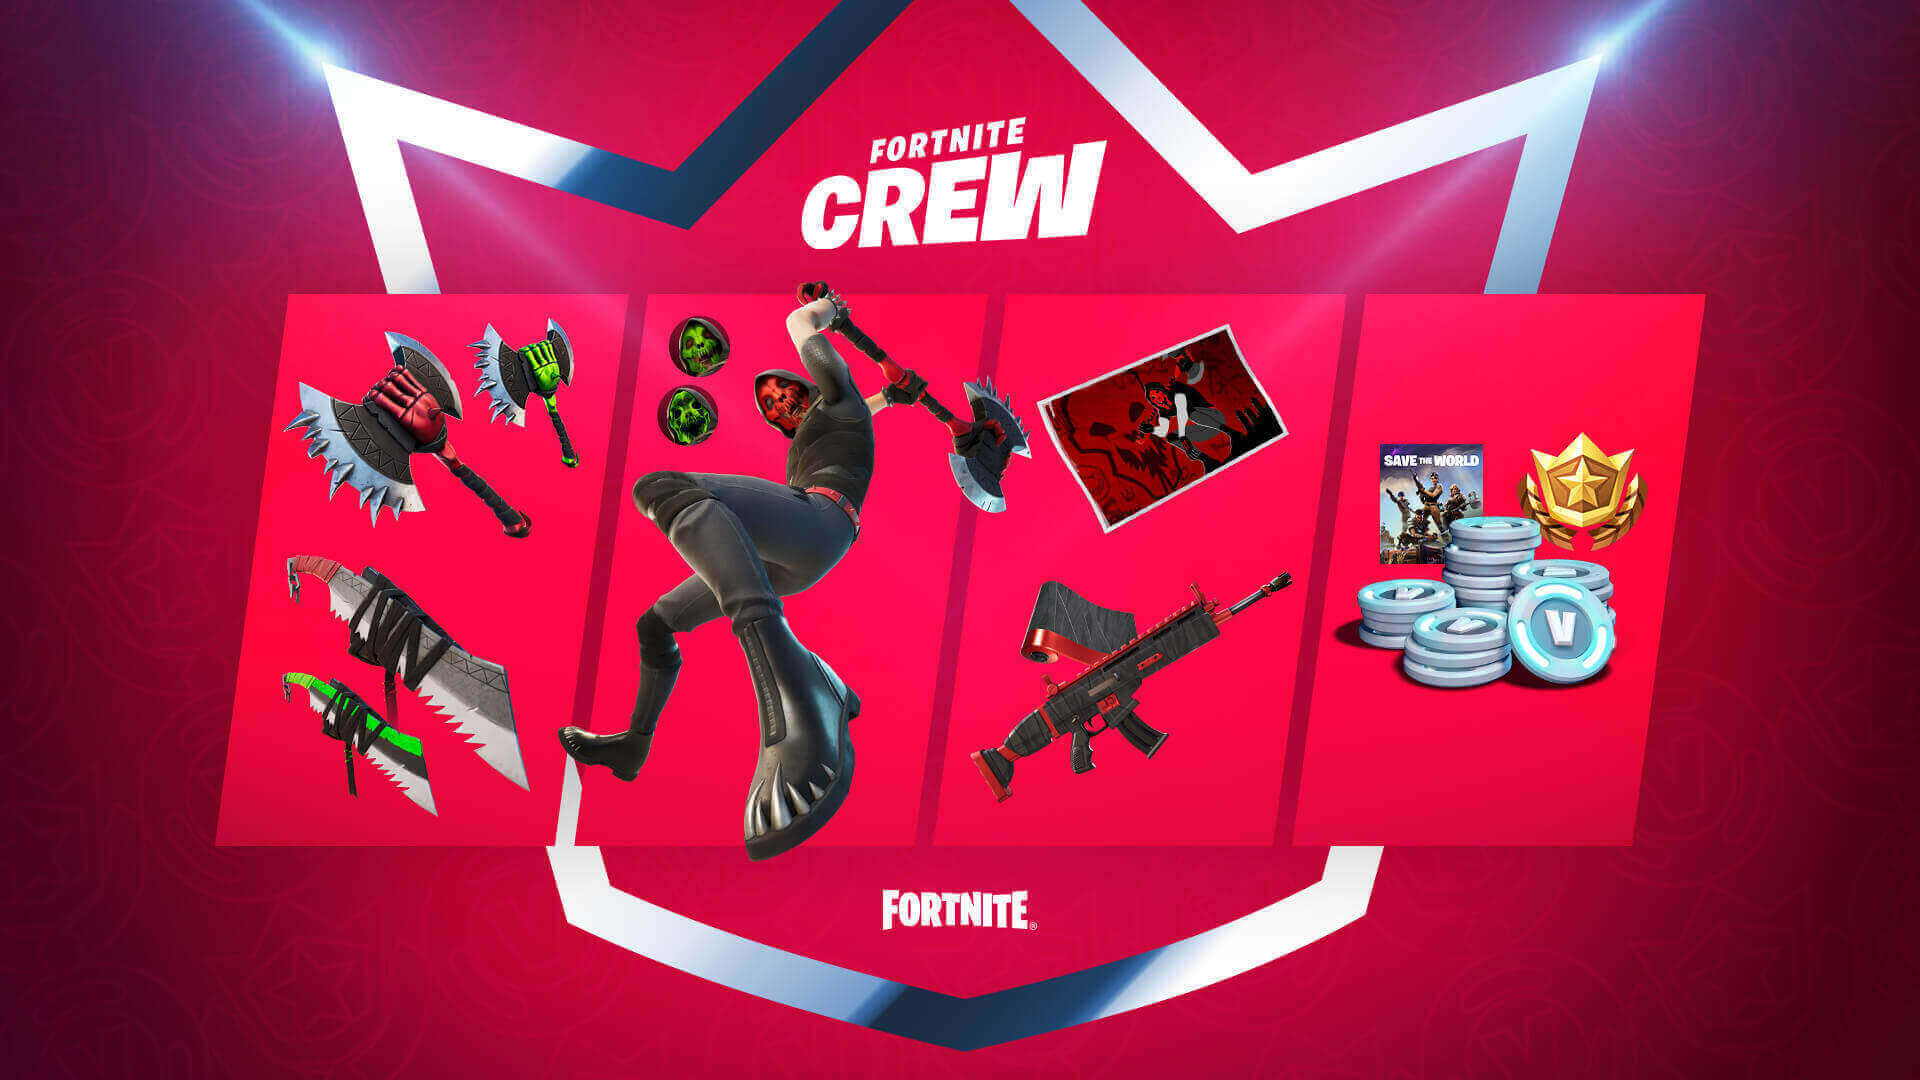 May S Fortnite Crew Pack Arrives Friday Night Exclusive Deimos Skin Save The World Access